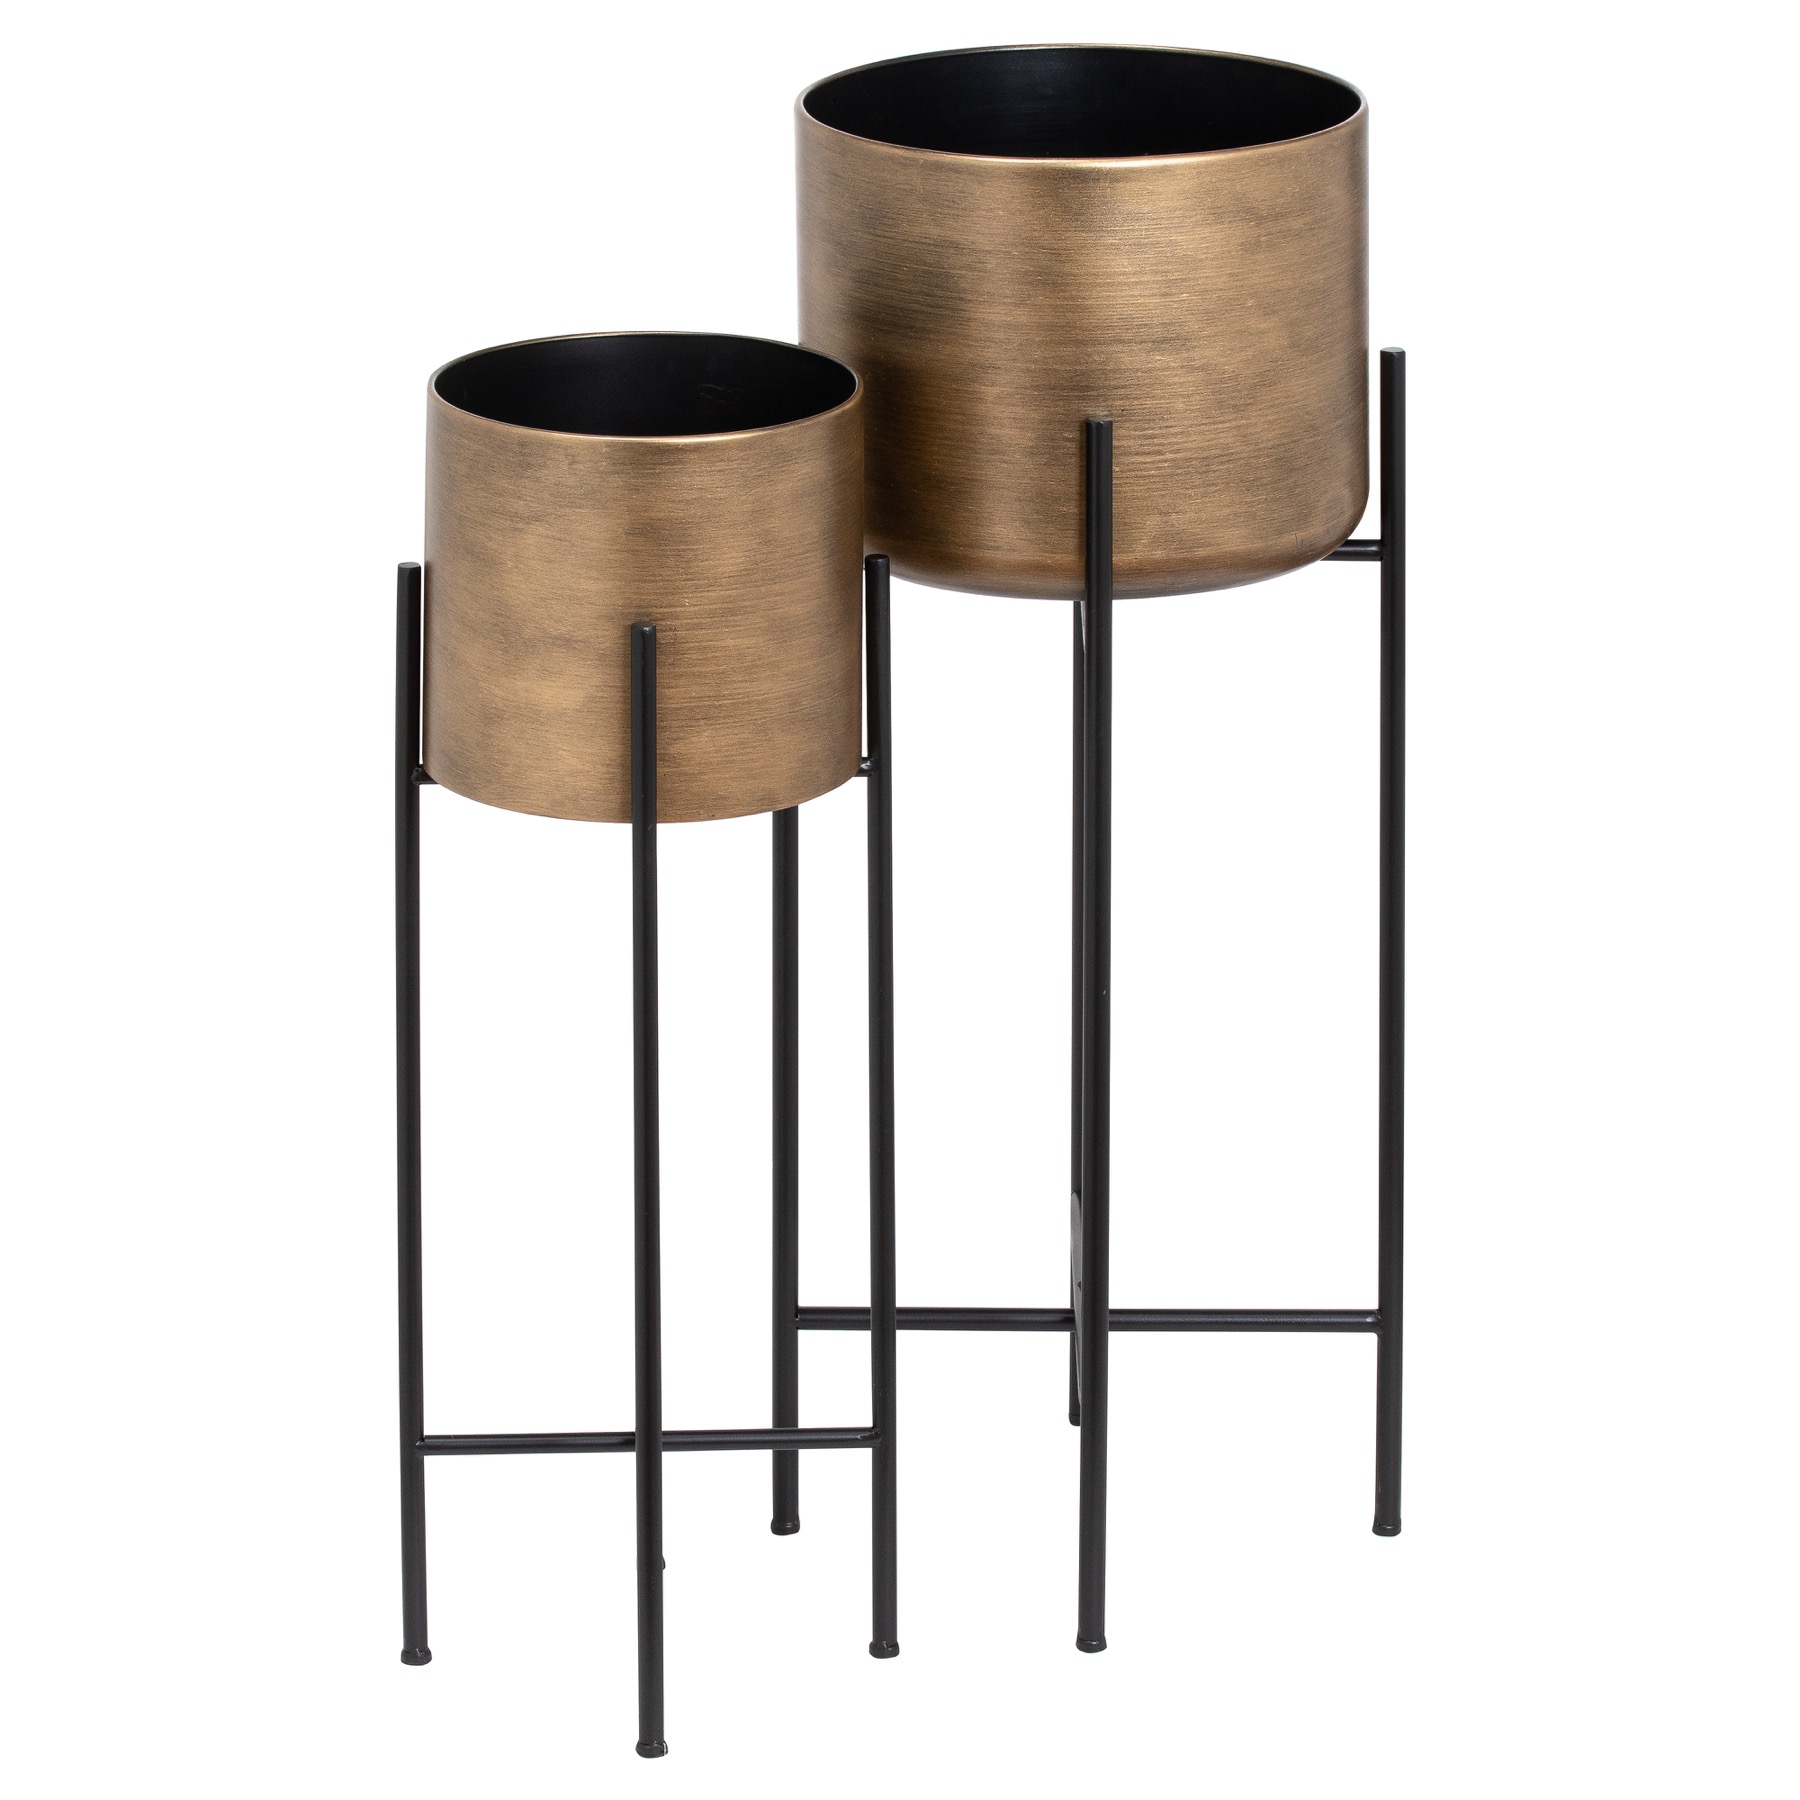 Set Of Two Bronze Planters On Stand - Image 1